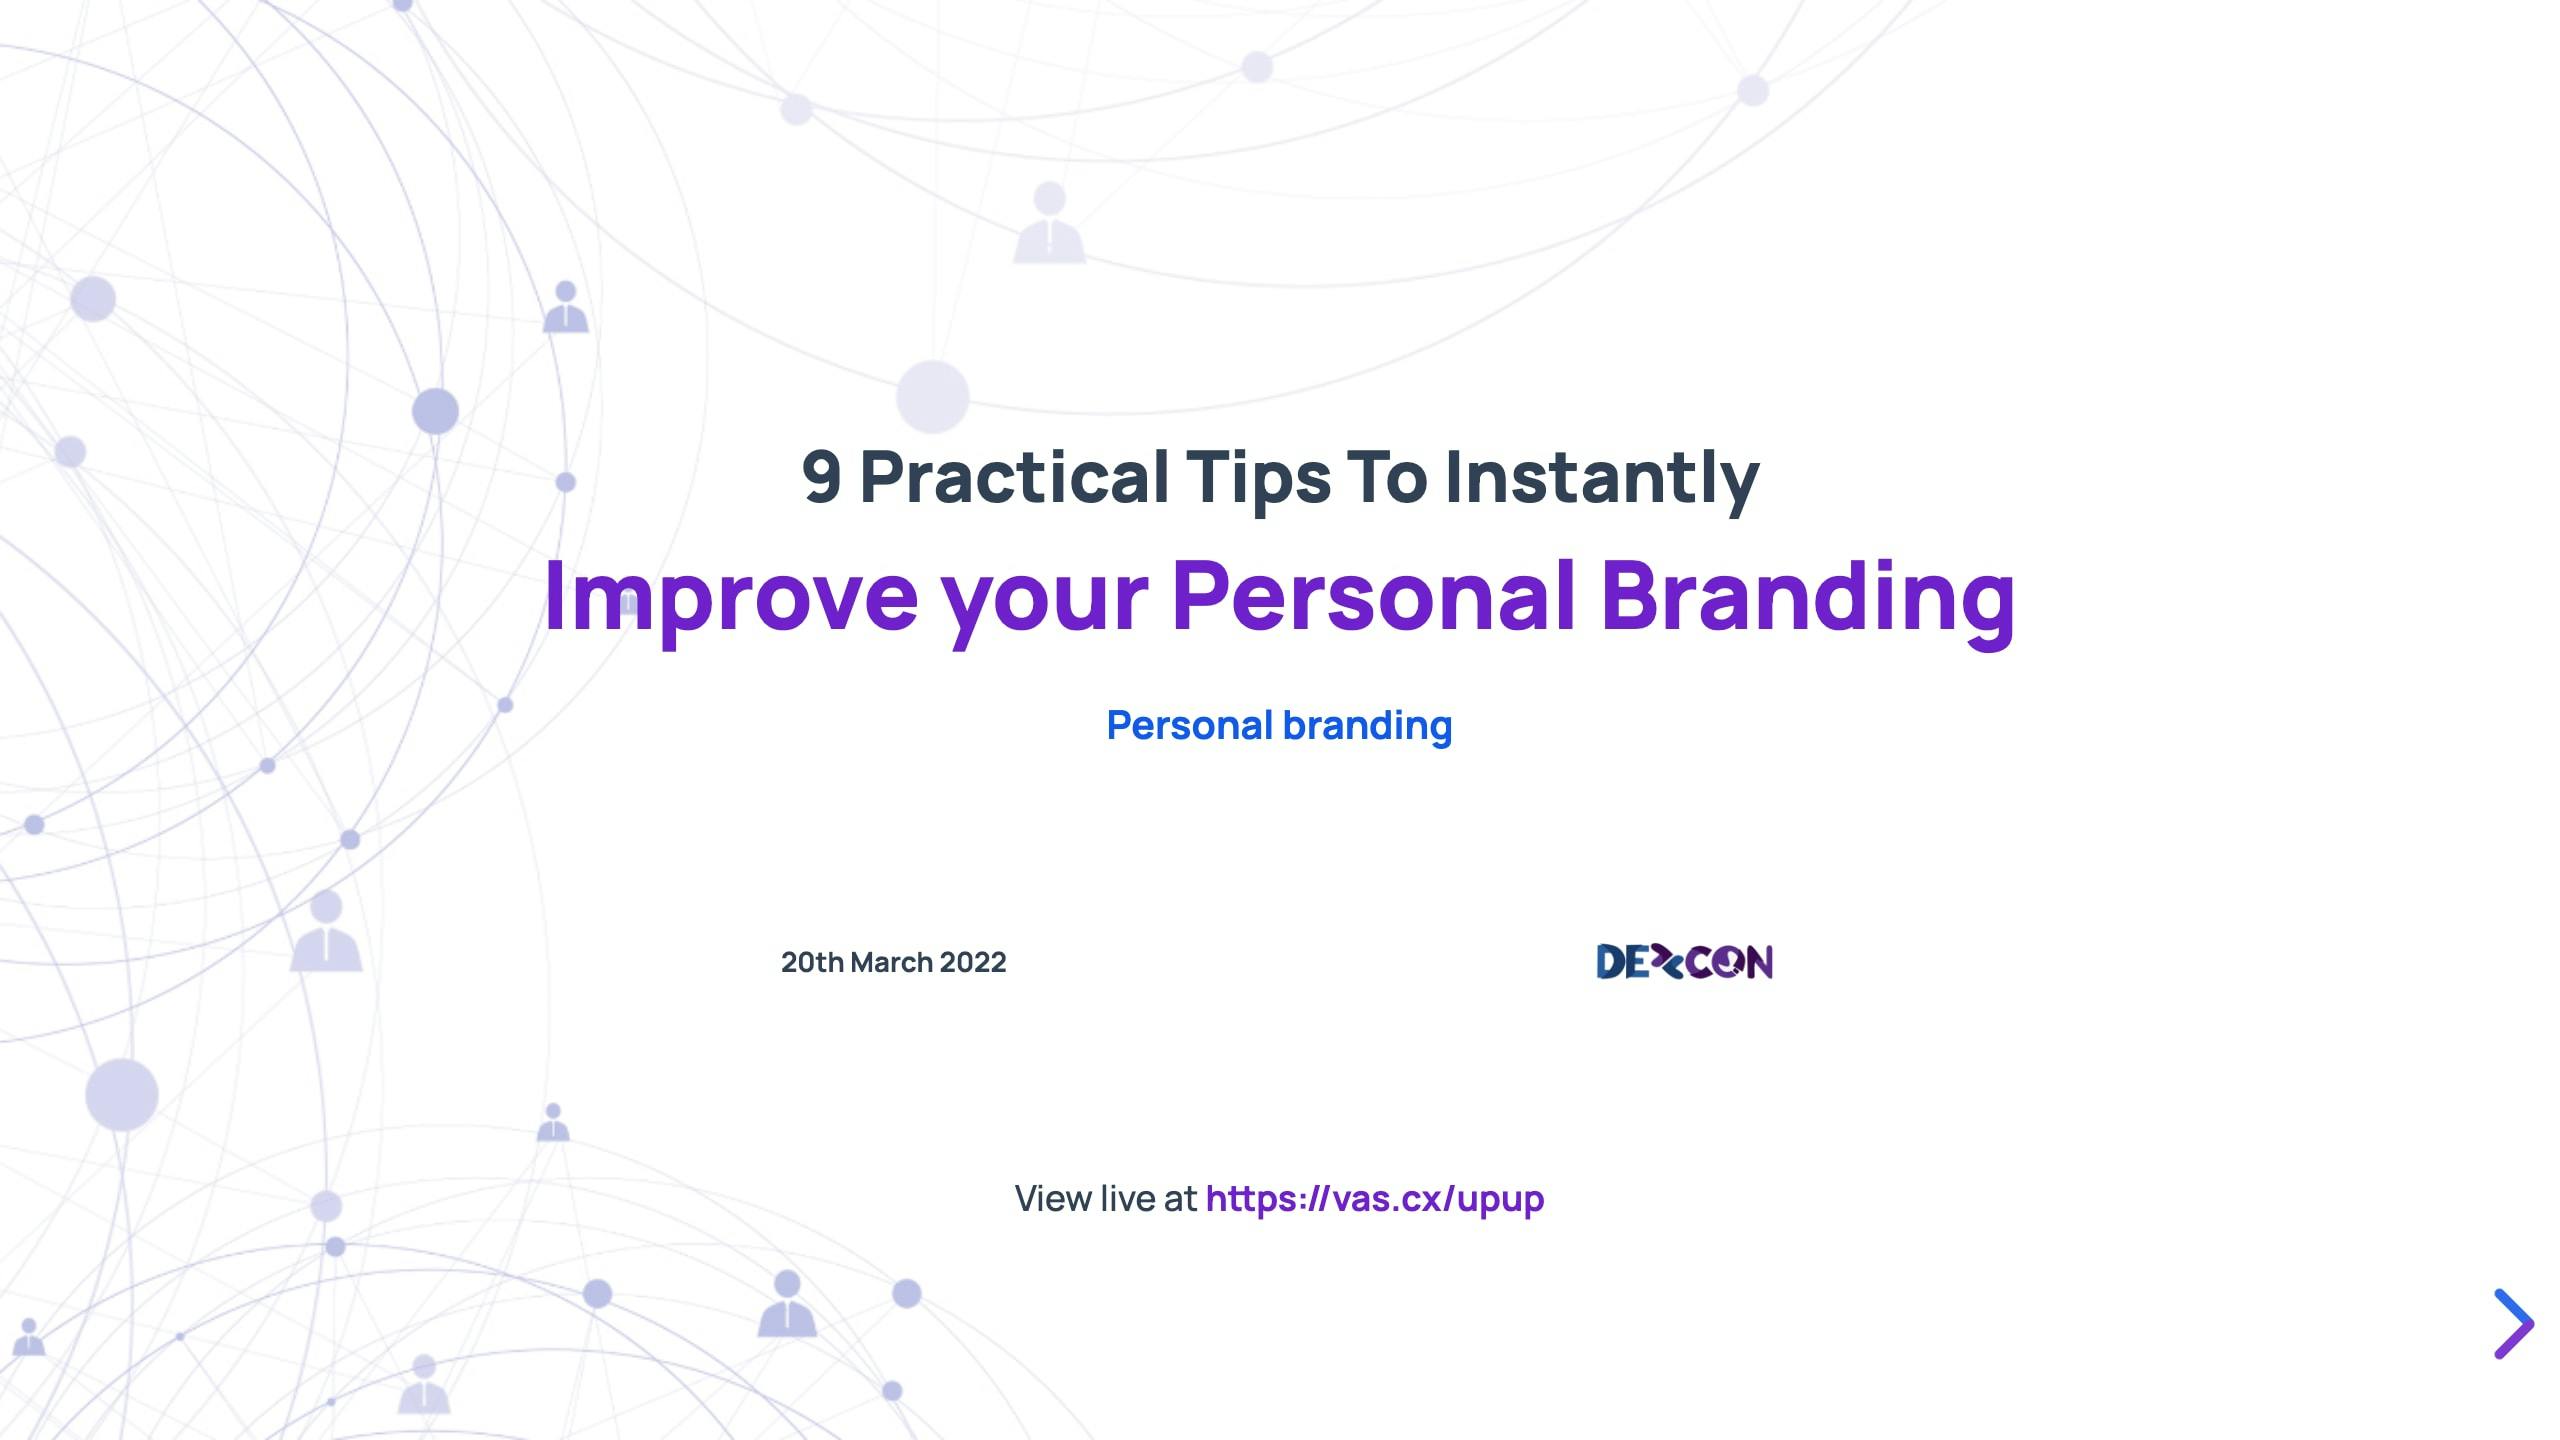 9 Practical Tips To Instantly Improve your Personal Branding